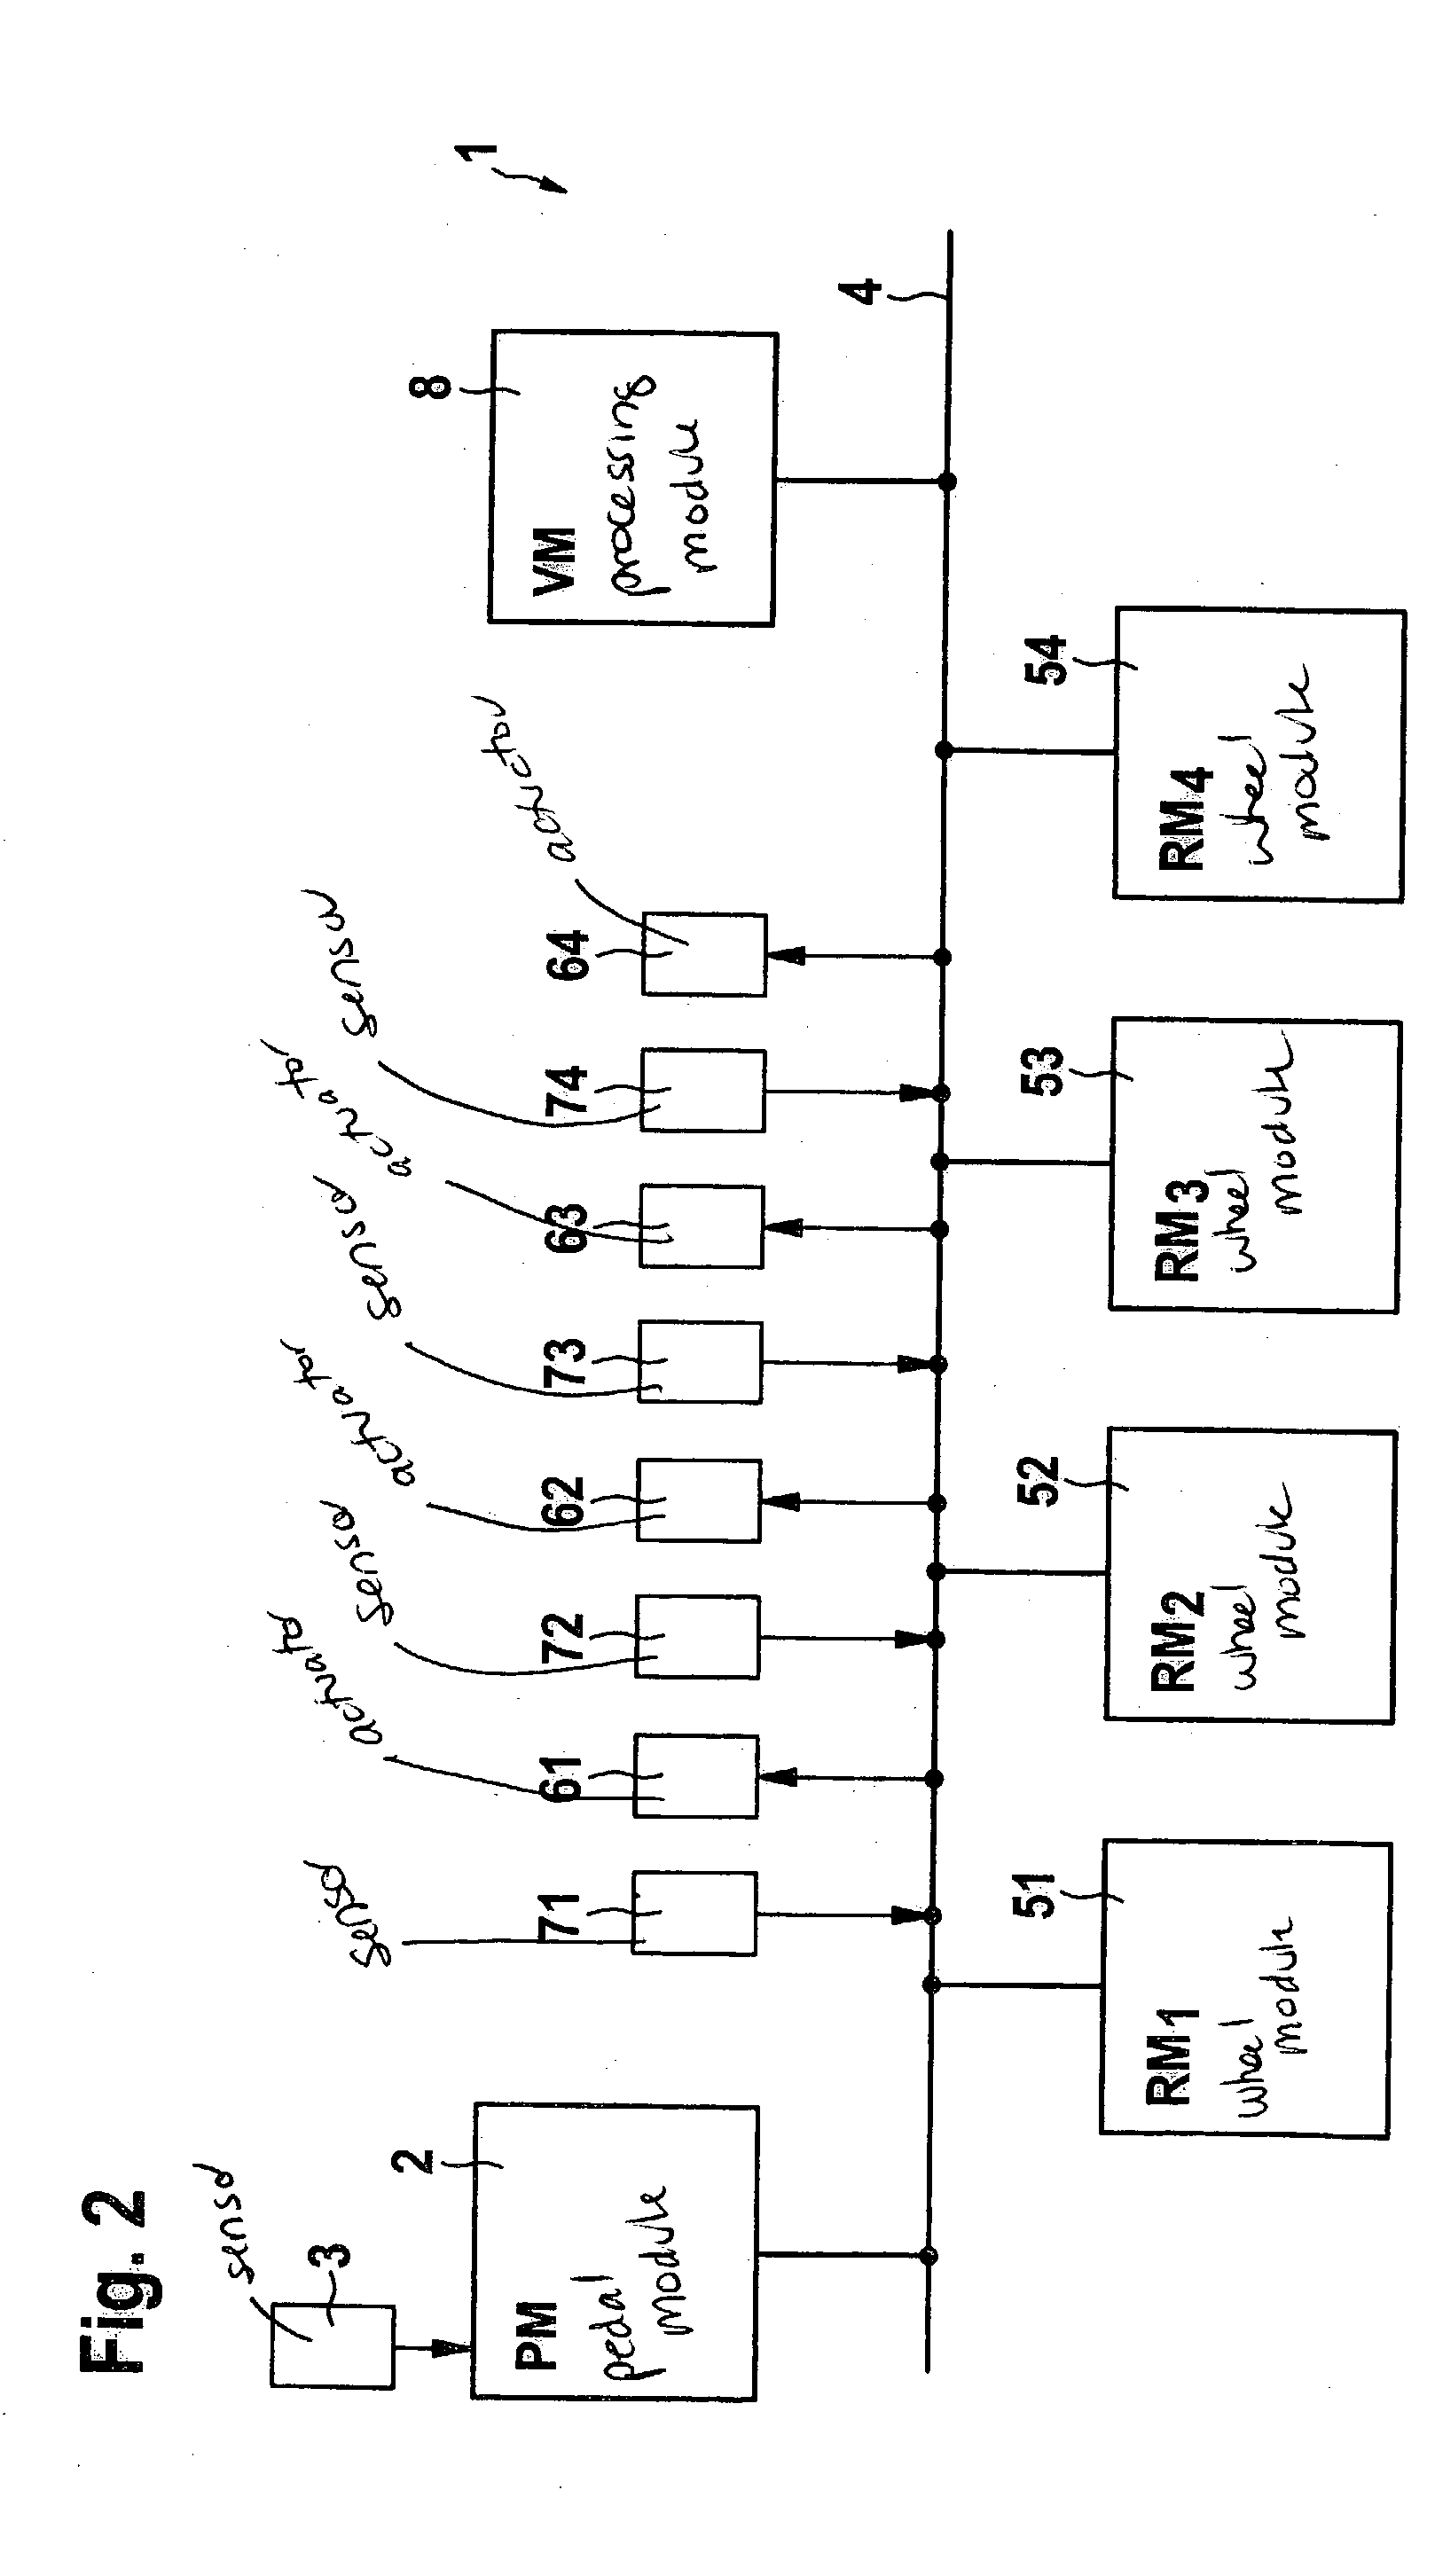 Method for mutual monitoring of components of a distributed computer system